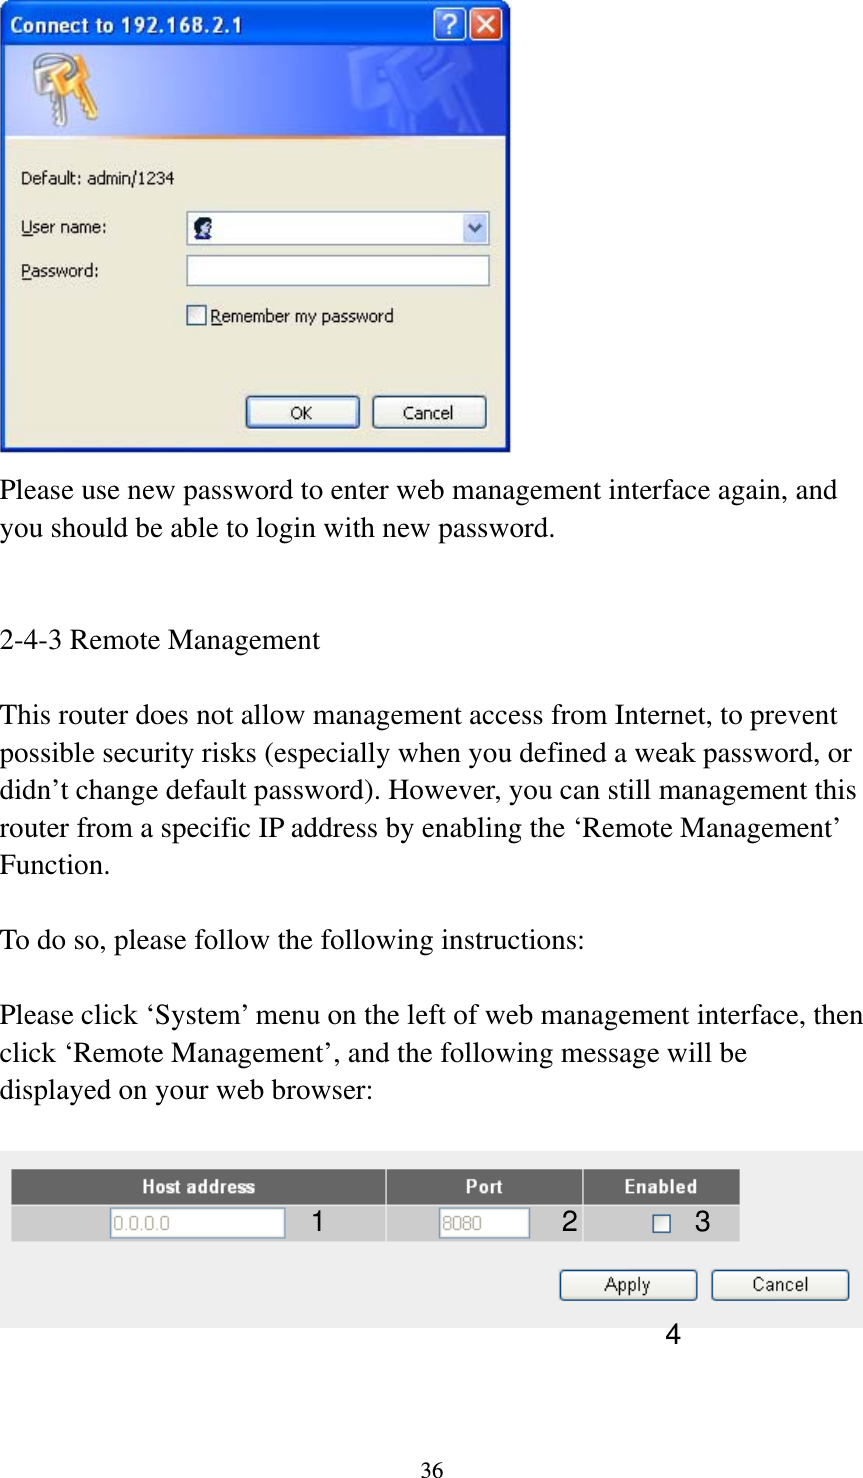 36  Please use new password to enter web management interface again, and you should be able to login with new password.   2-4-3 Remote Management  This router does not allow management access from Internet, to prevent possible security risks (especially when you defined a weak password, or didn’t change default password). However, you can still management this router from a specific IP address by enabling the ‘Remote Management’ Function.  To do so, please follow the following instructions:  Please click ‘System’ menu on the left of web management interface, then click ‘Remote Management’, and the following message will be displayed on your web browser:     1234